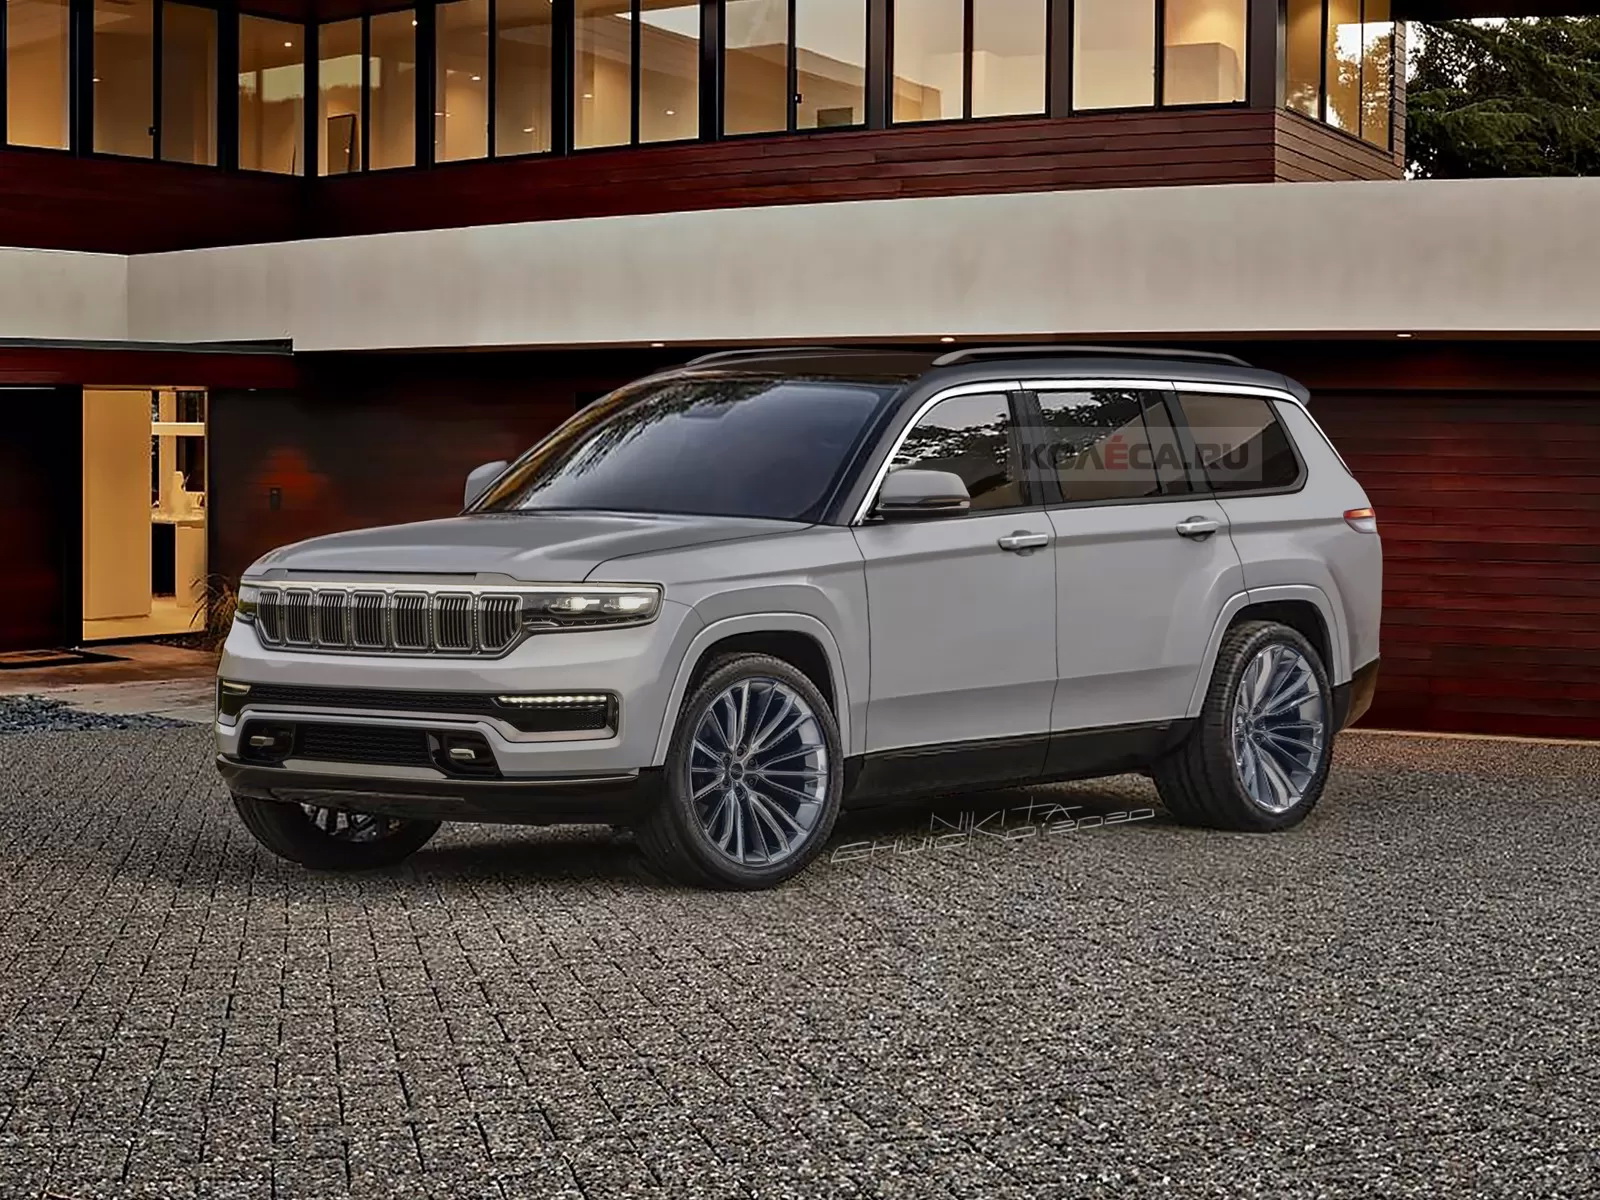 2022 Jeep Grand Cherokee Renderings Look Pretty Darn Close To The Real